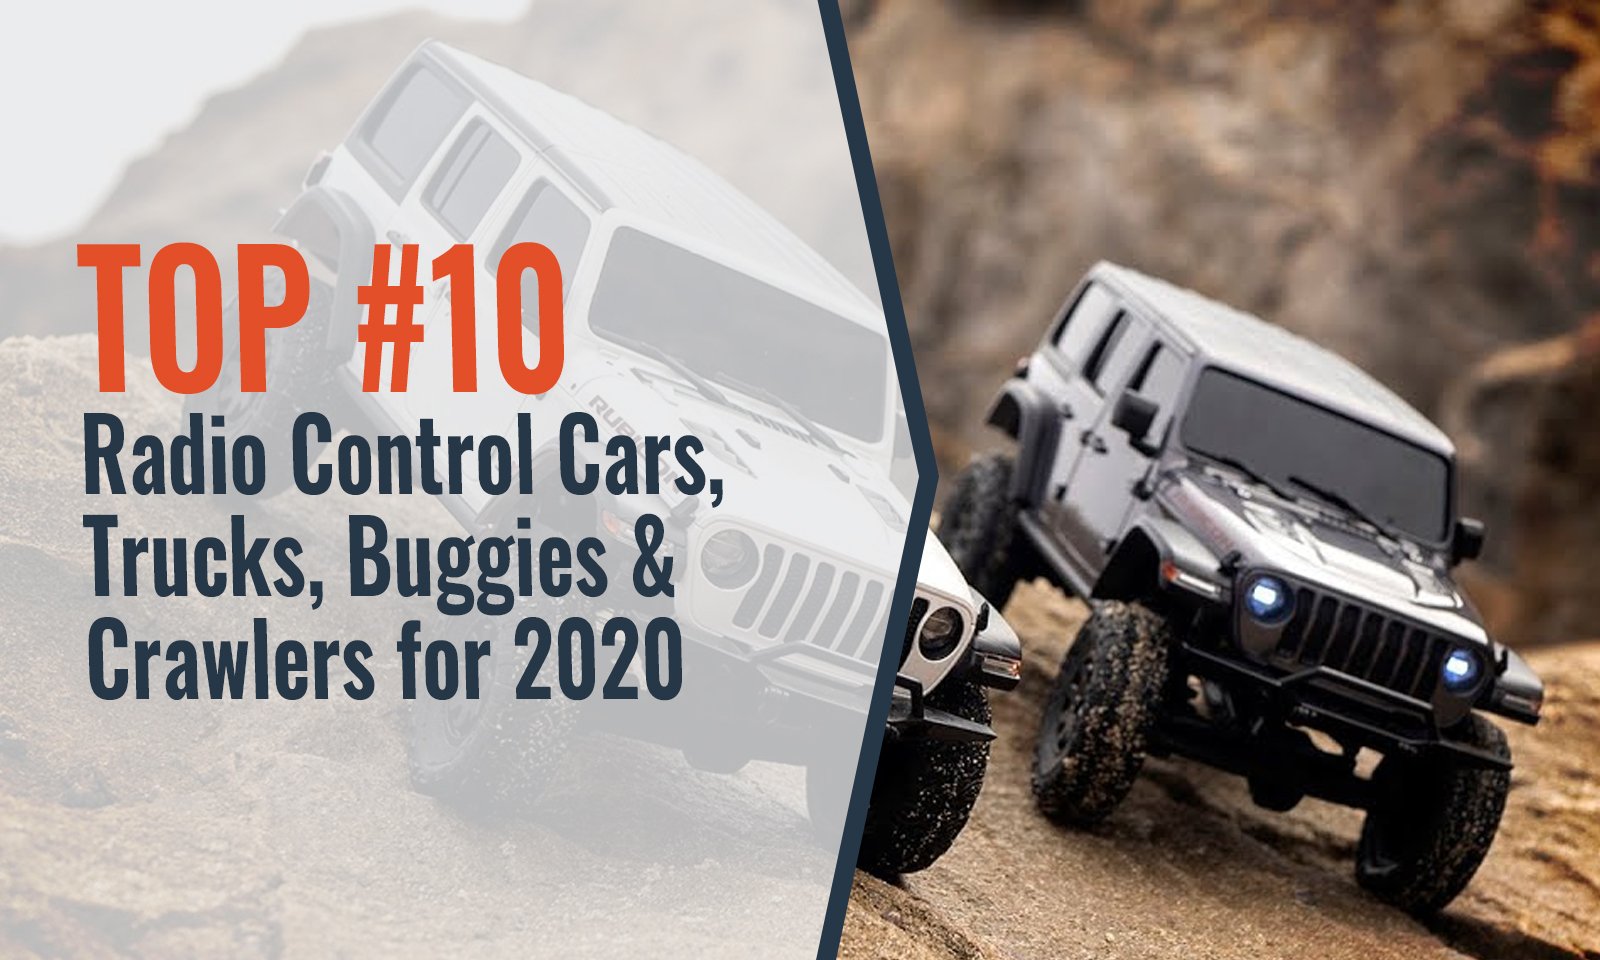 Top 10 RC Cars for 2020